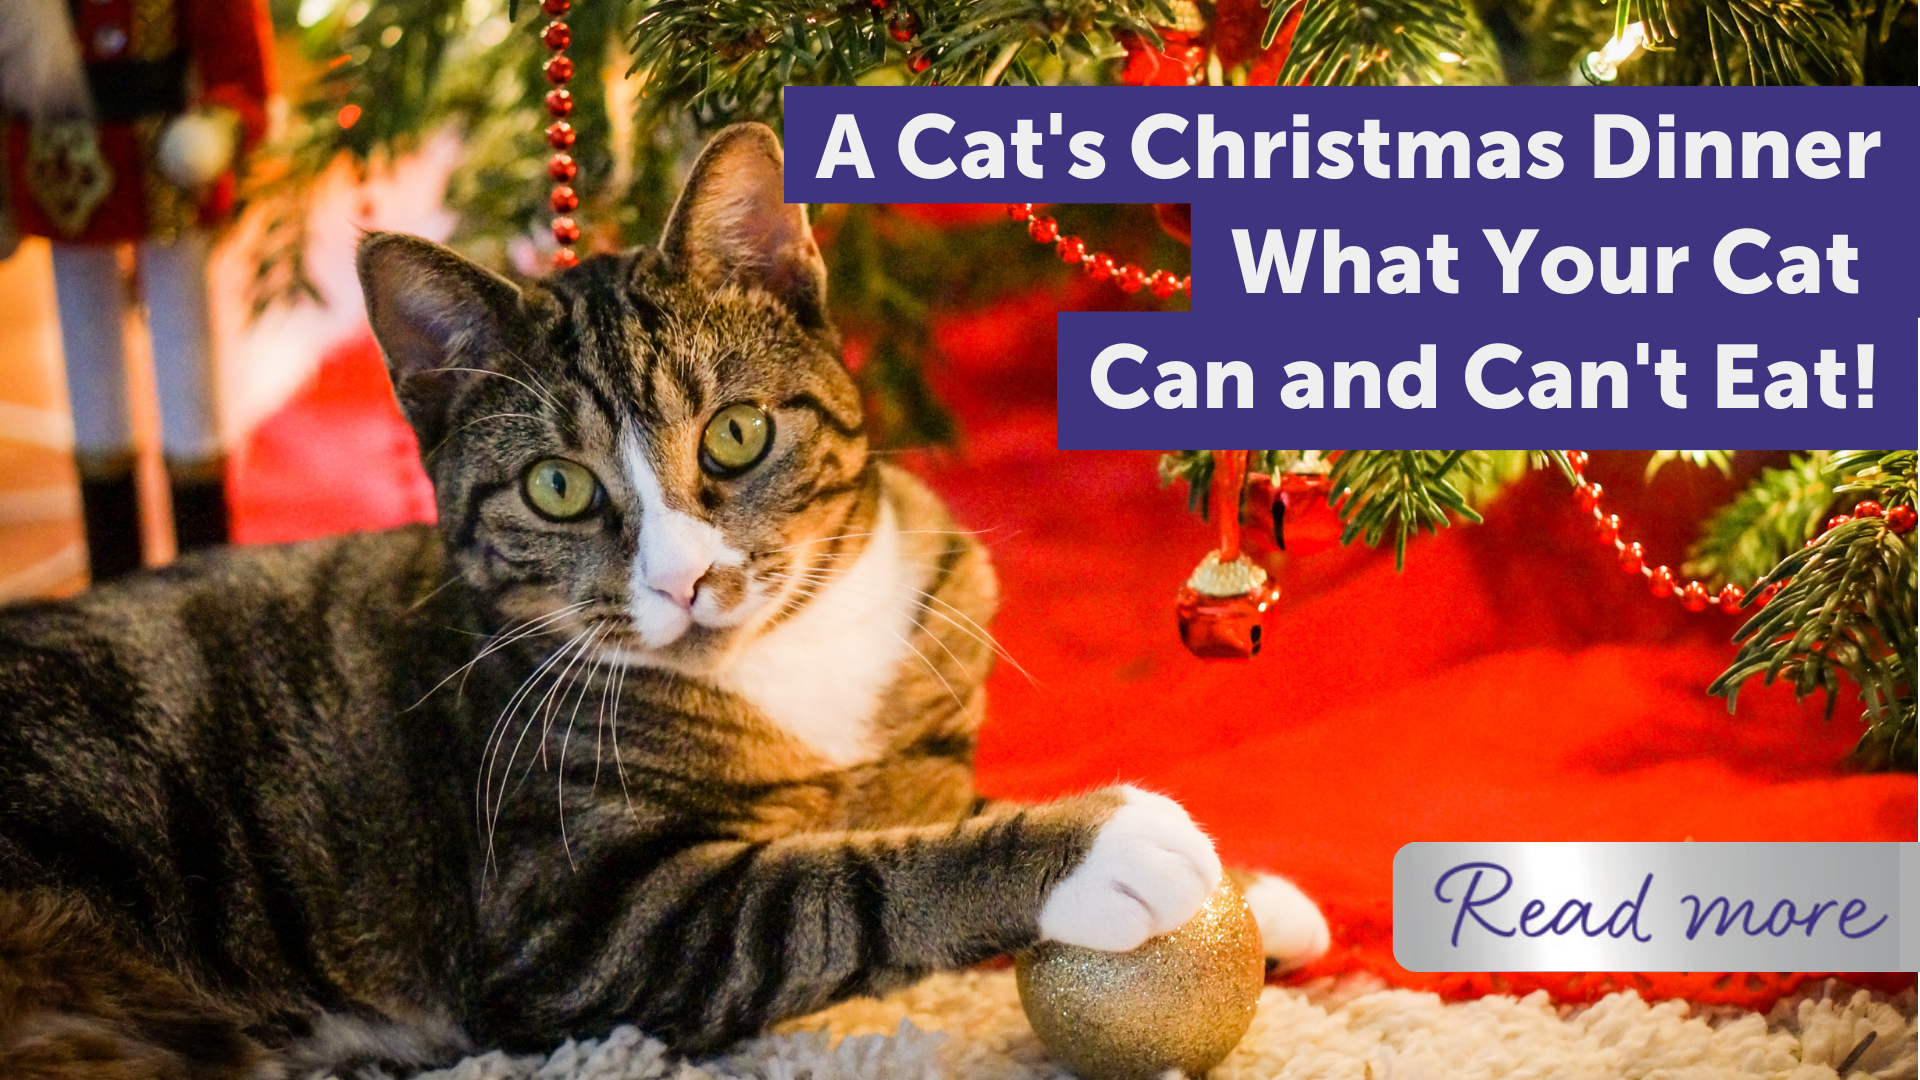 A Cat's Christmas Dinner: What They Can and Can't Eat